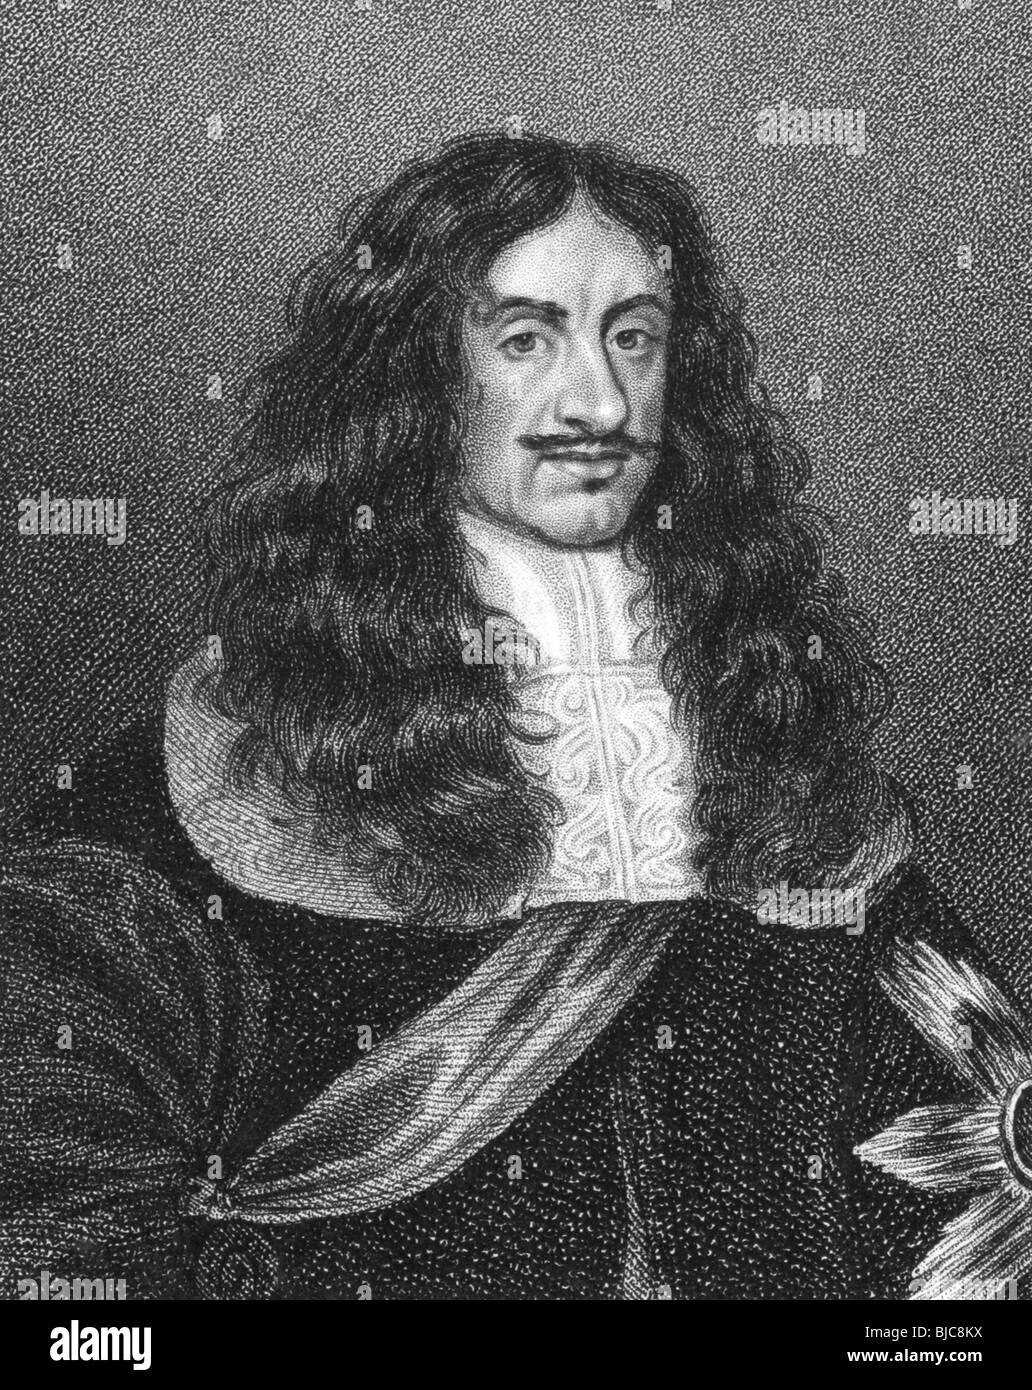 Charles II (1630-1685) on engraving from the 1800s. King of England, Scotland and Ireland during 1660-1685. Stock Photo